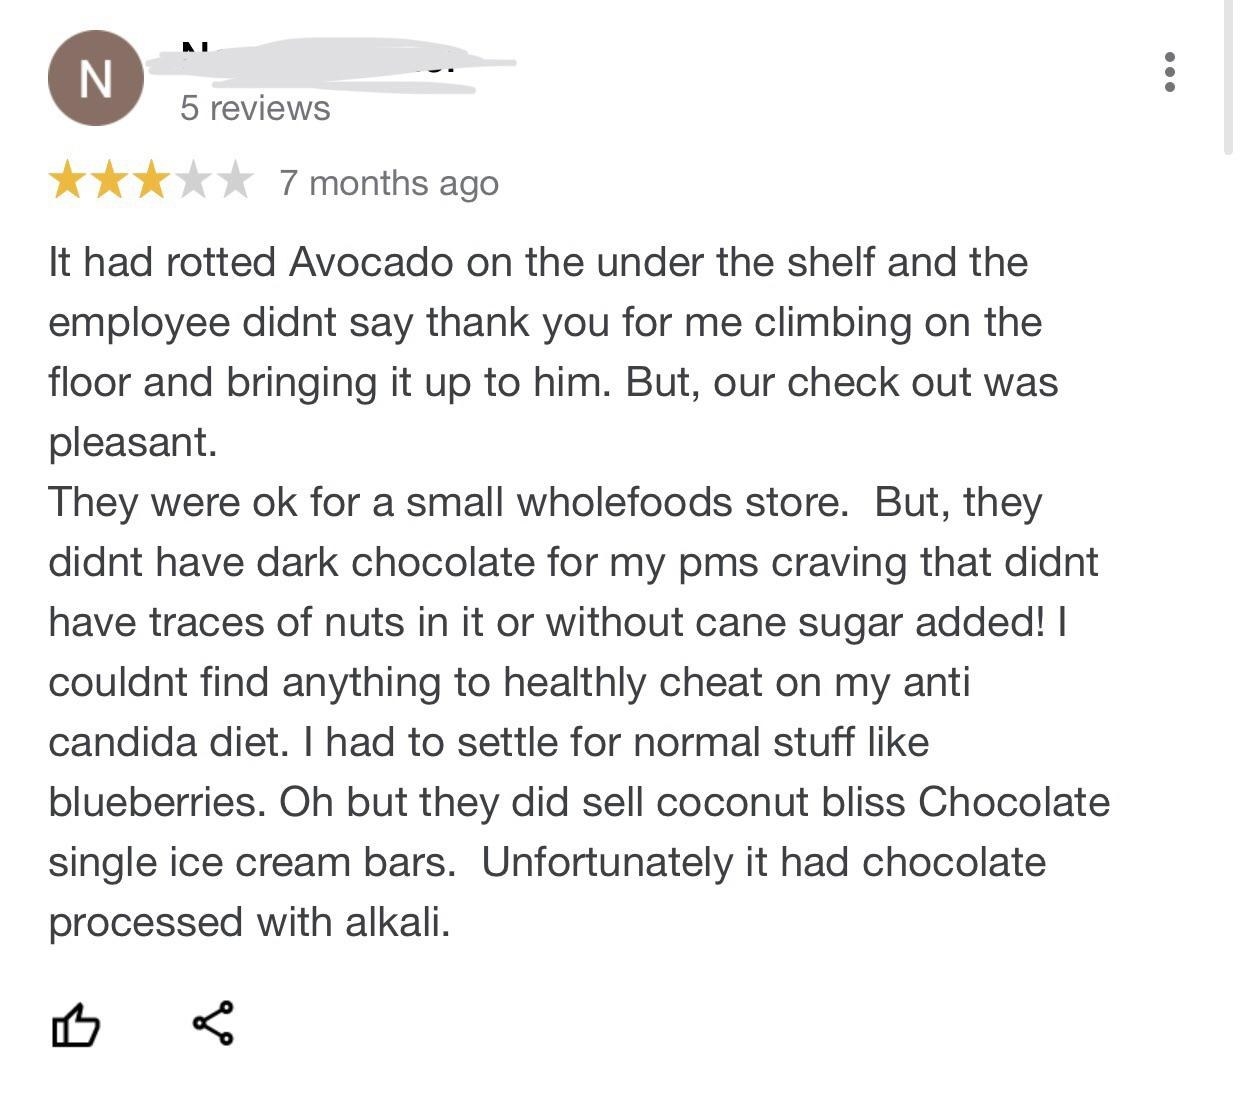 &quot;They were ok for a small wholefoods store.&quot;